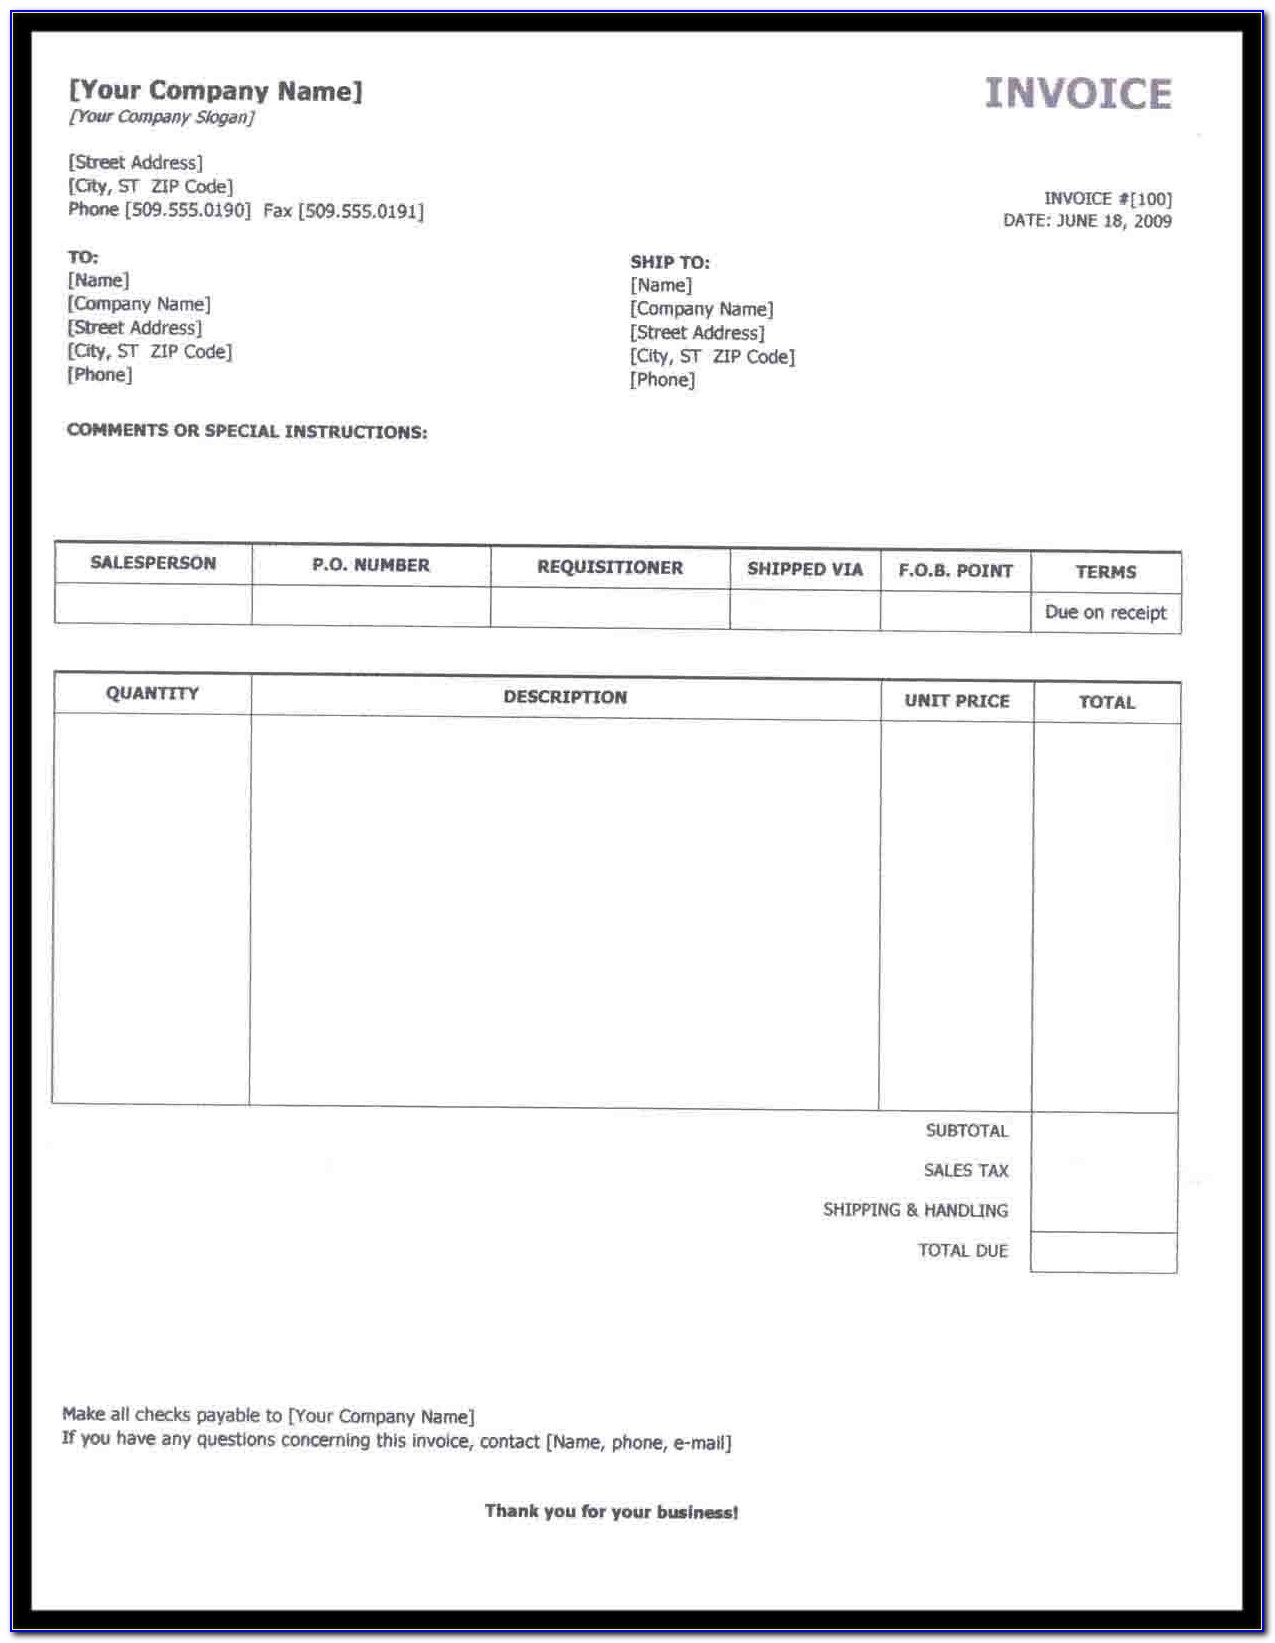 Self Employed Invoice Template As Example Of Self Employed Template With Recipient Name And Address